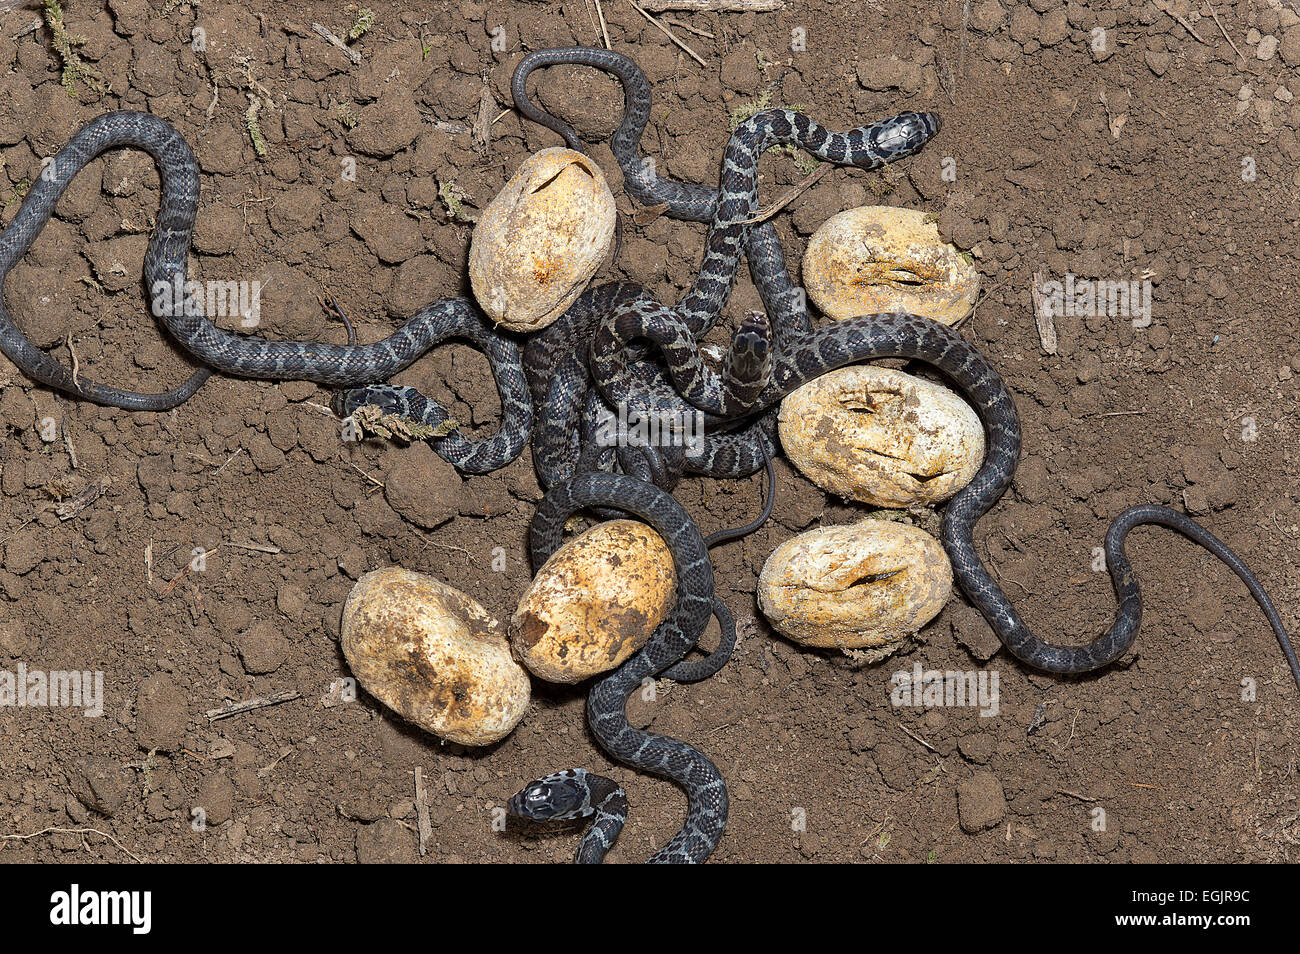 northern black racer, Coluber constrictor constrictor, eggs hatching, with young, north american reptile, snake, constrictor Stock Photo